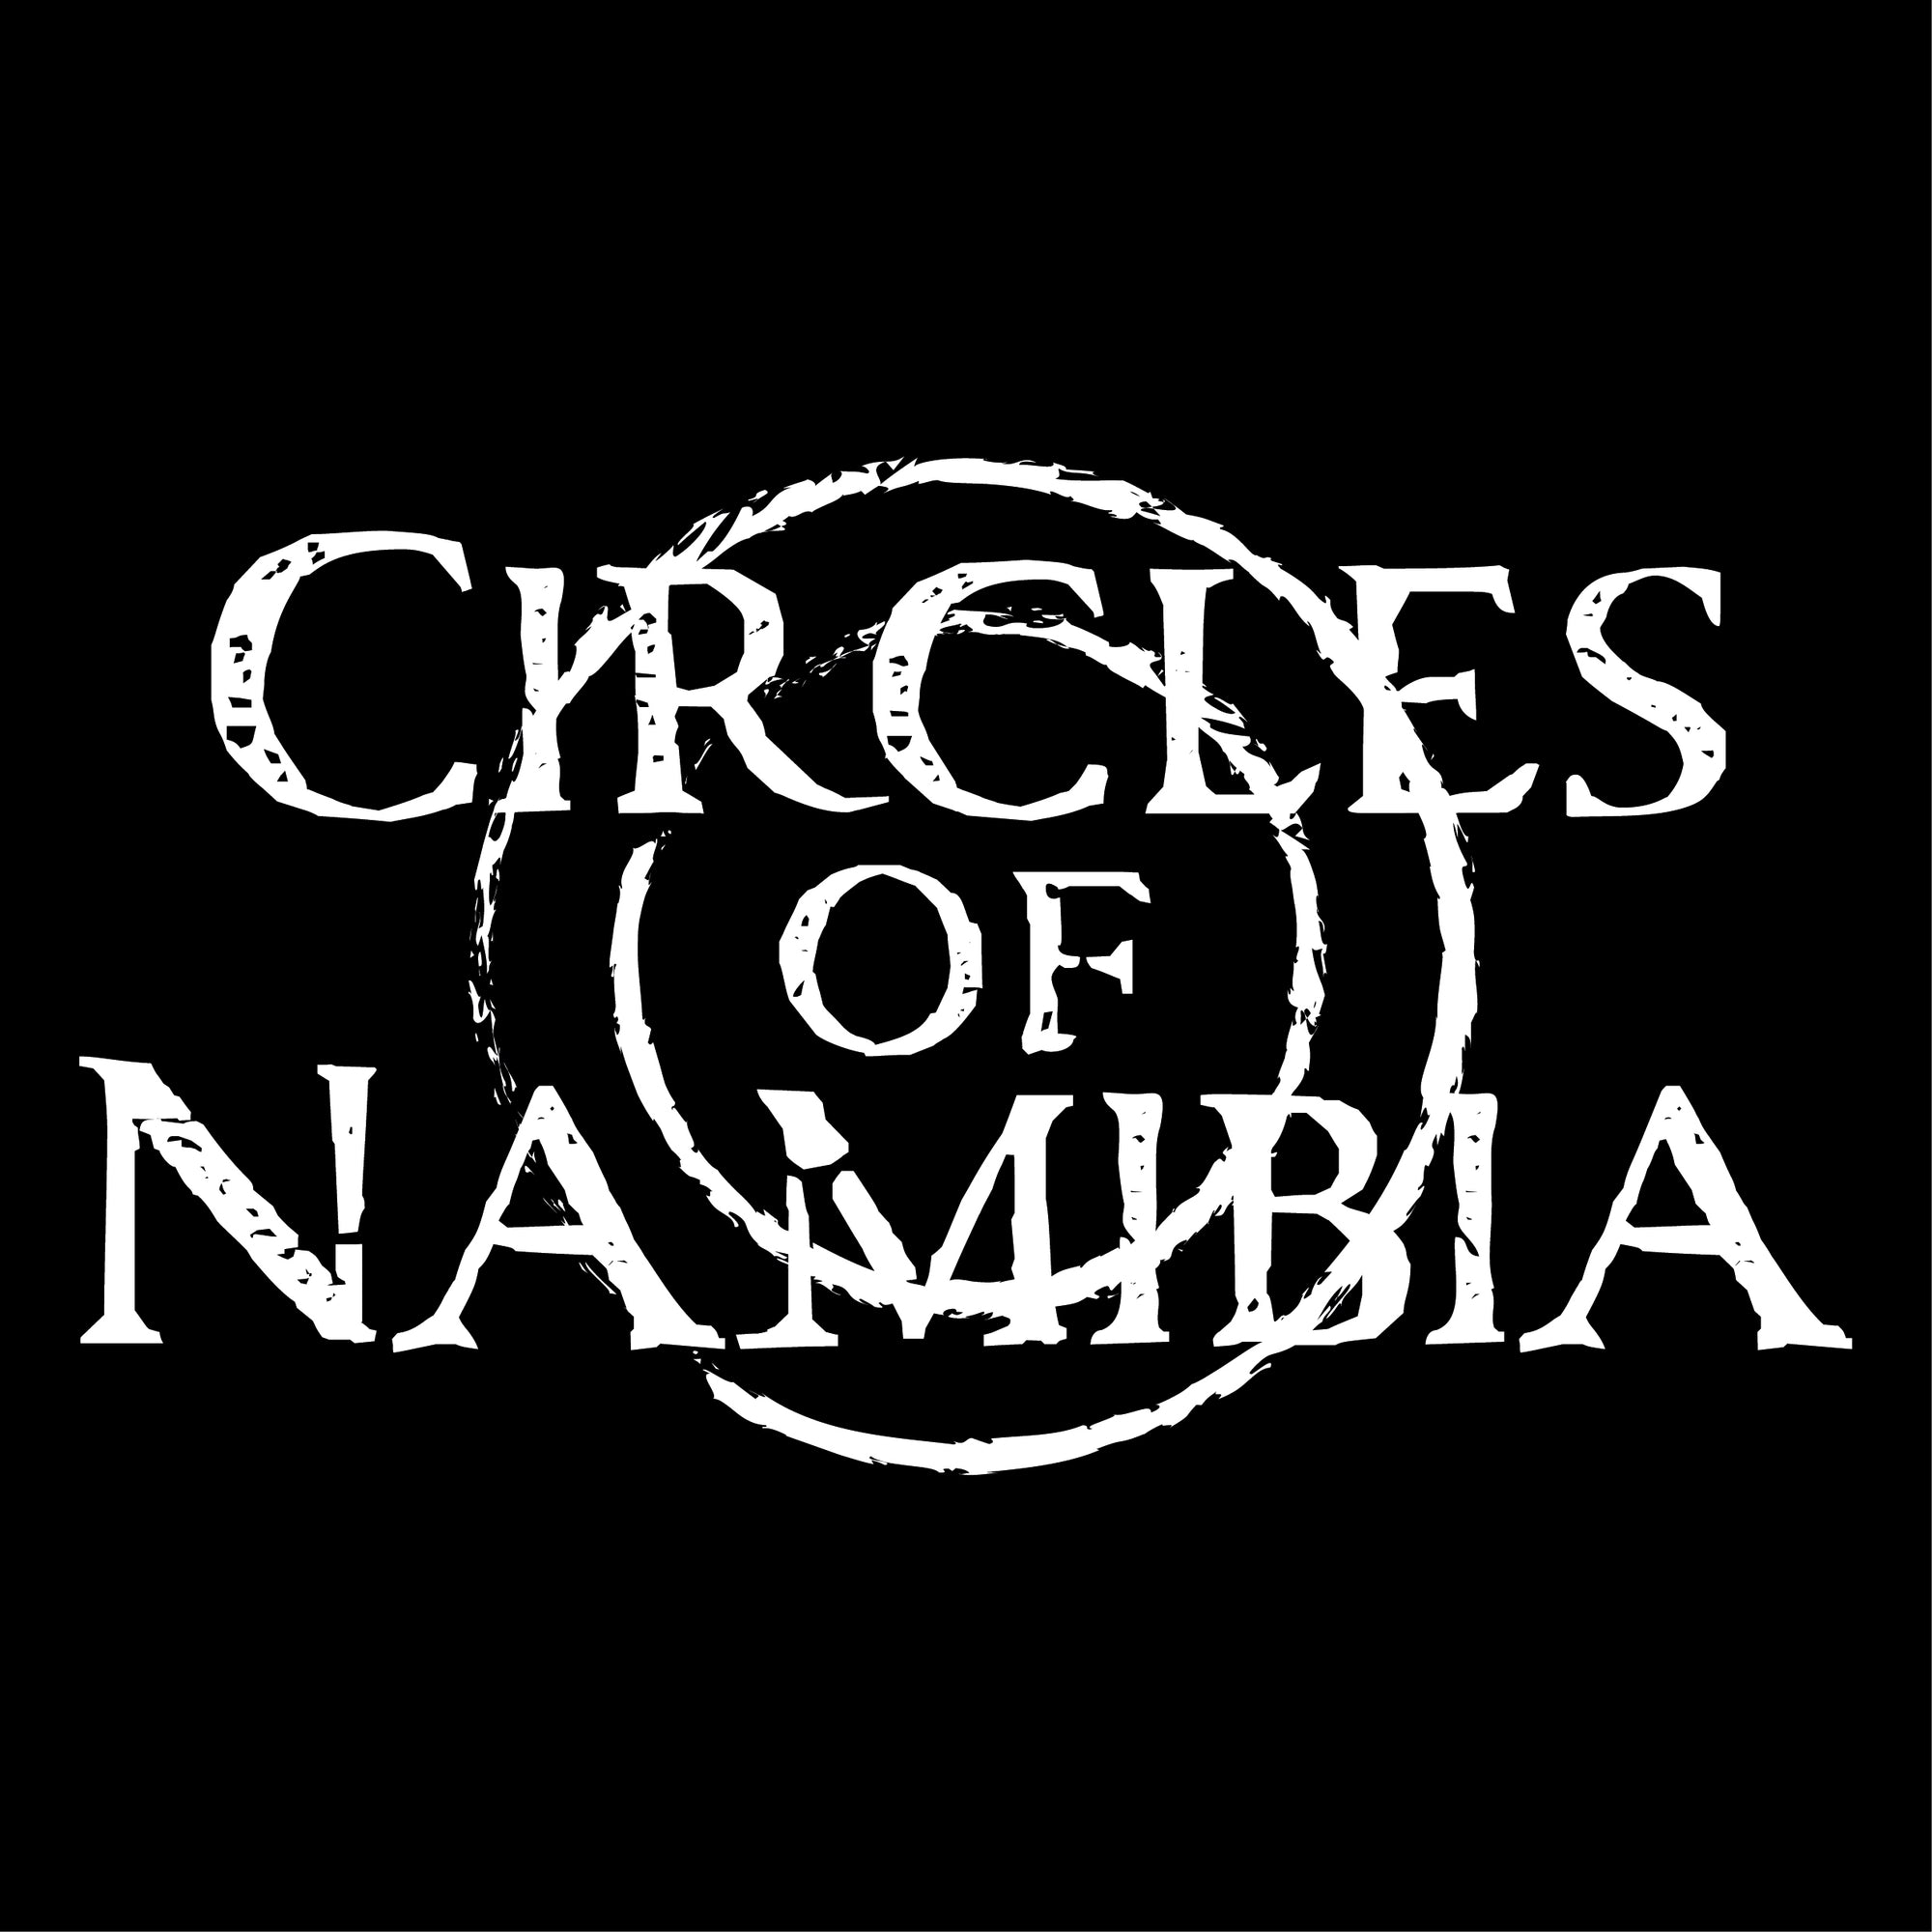 An Interview with Circles of Namibia